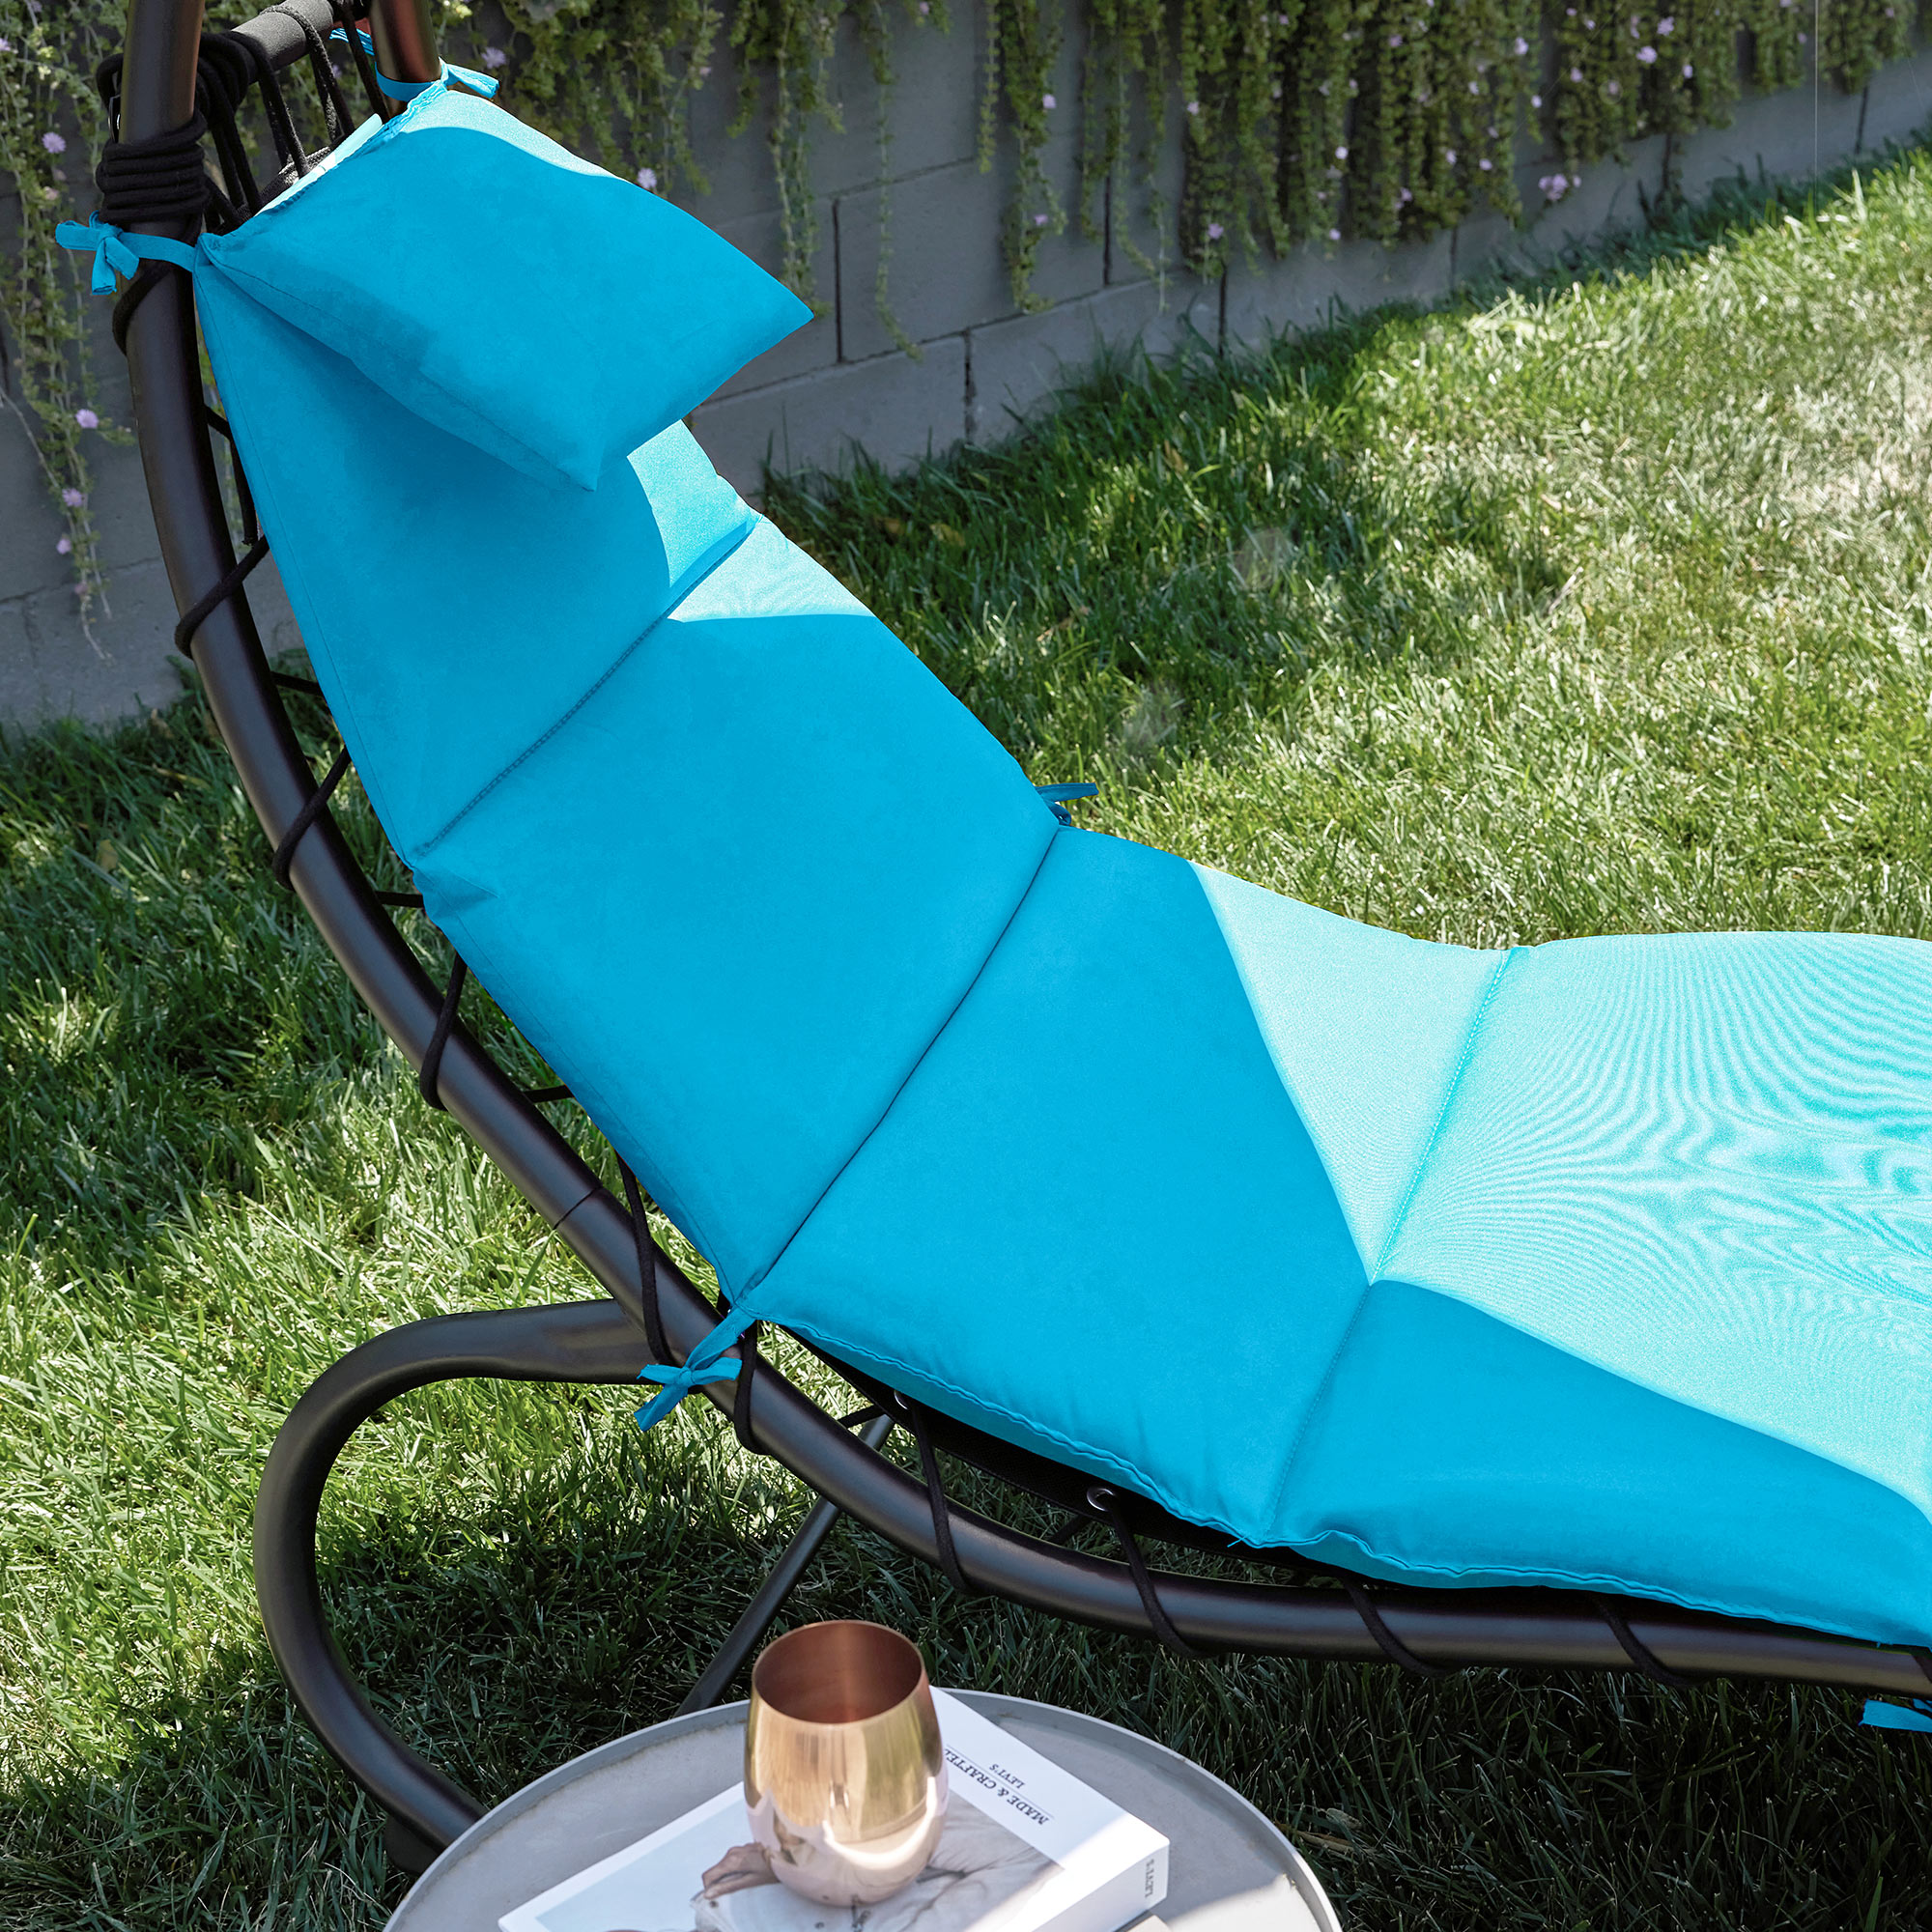 BELLEZE Outdoor Hanging Chaise Lounge Chair Swing Curved Cushion Seat Hammock With Canopy Sun Shade, Blue - image 2 of 4